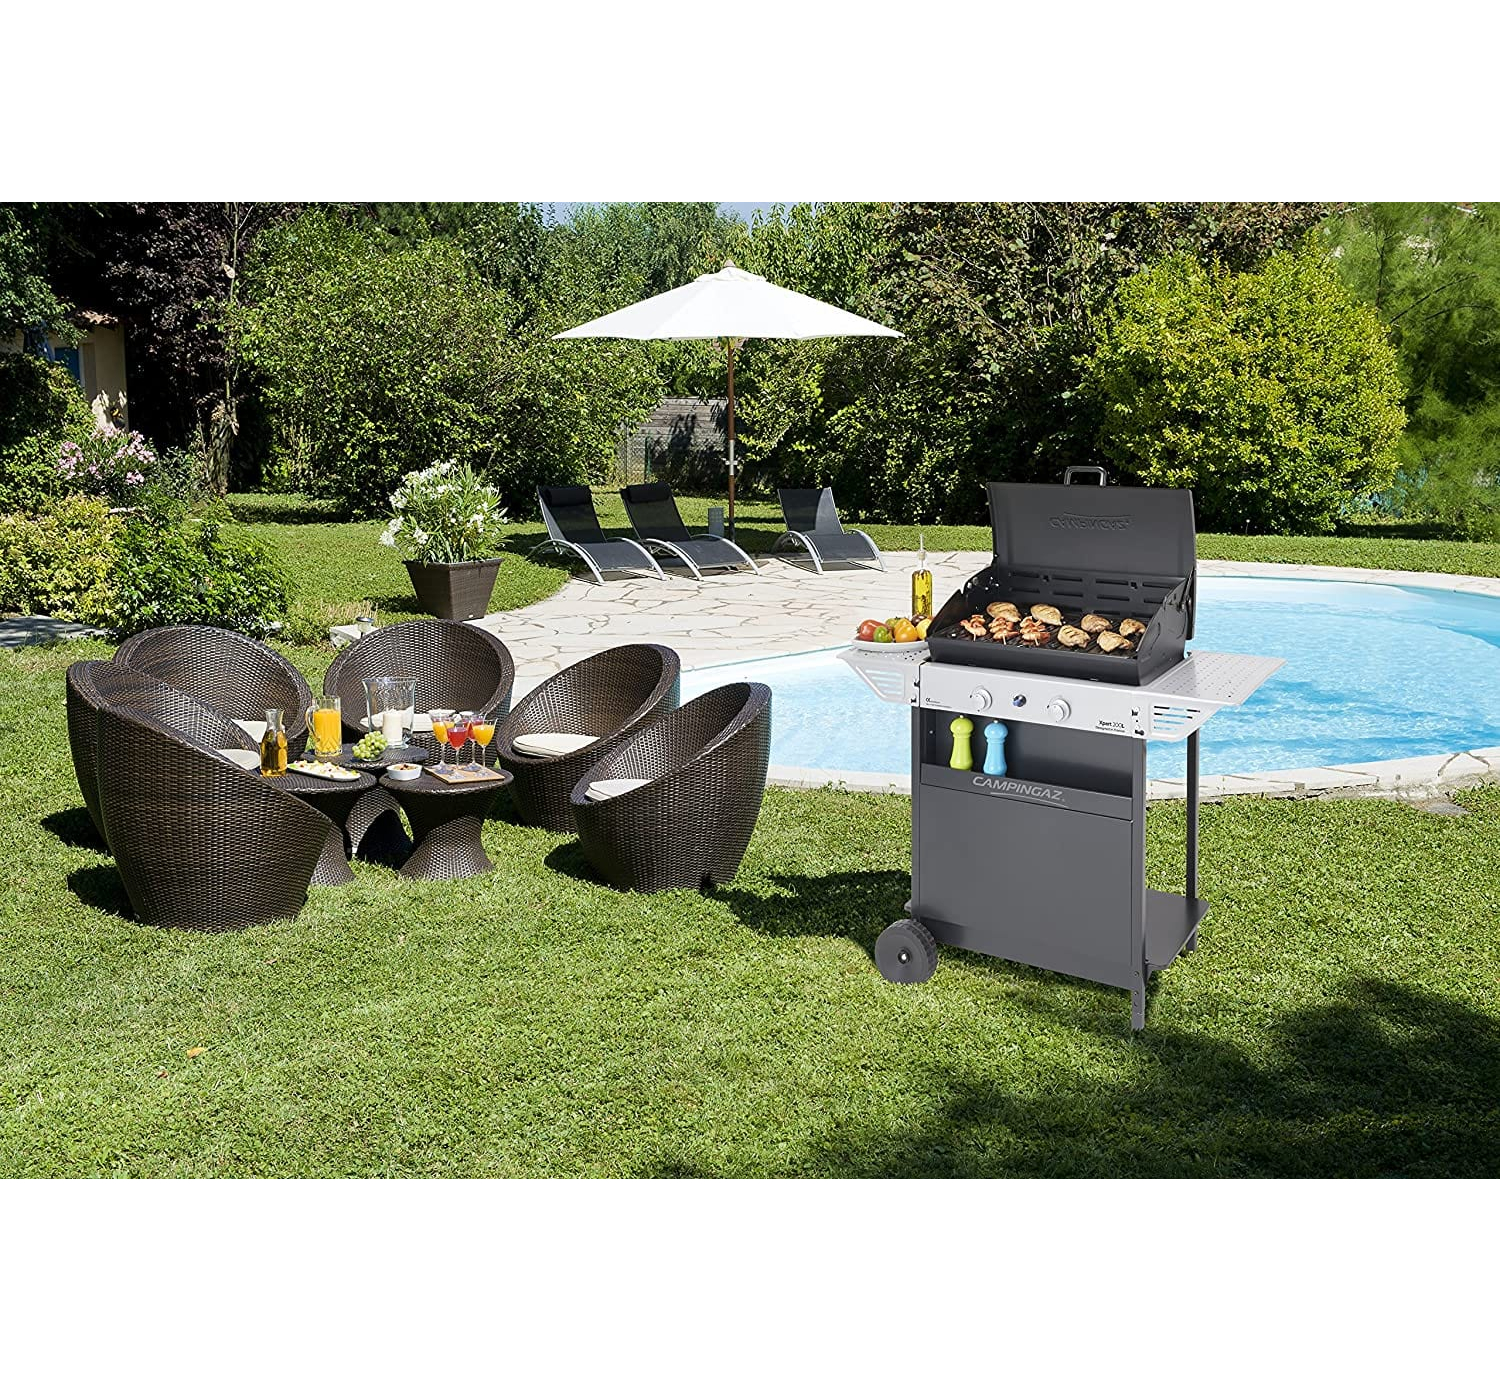 Tapis de protection terrasse pour barbecue Barbecook